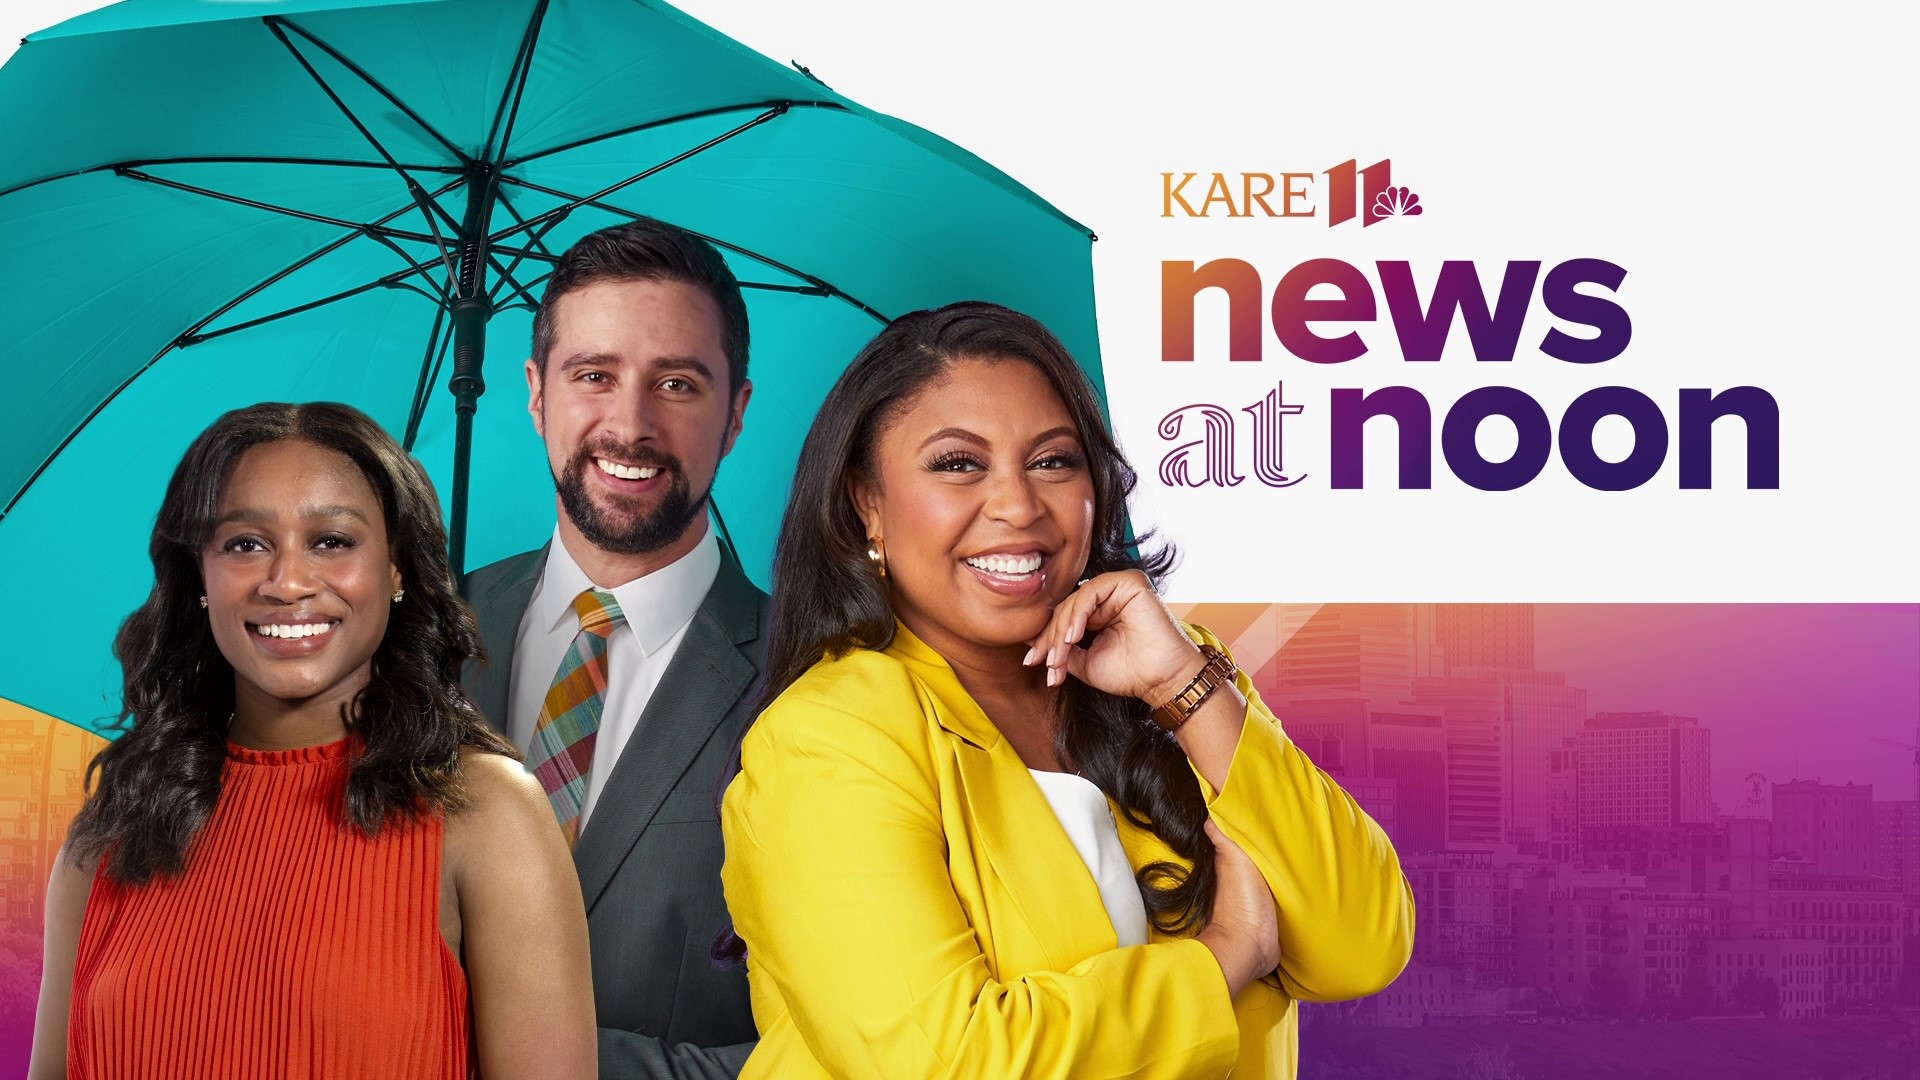 Get your news and weather, plus special guests join us each weekday on KARE 11 News at Noon.